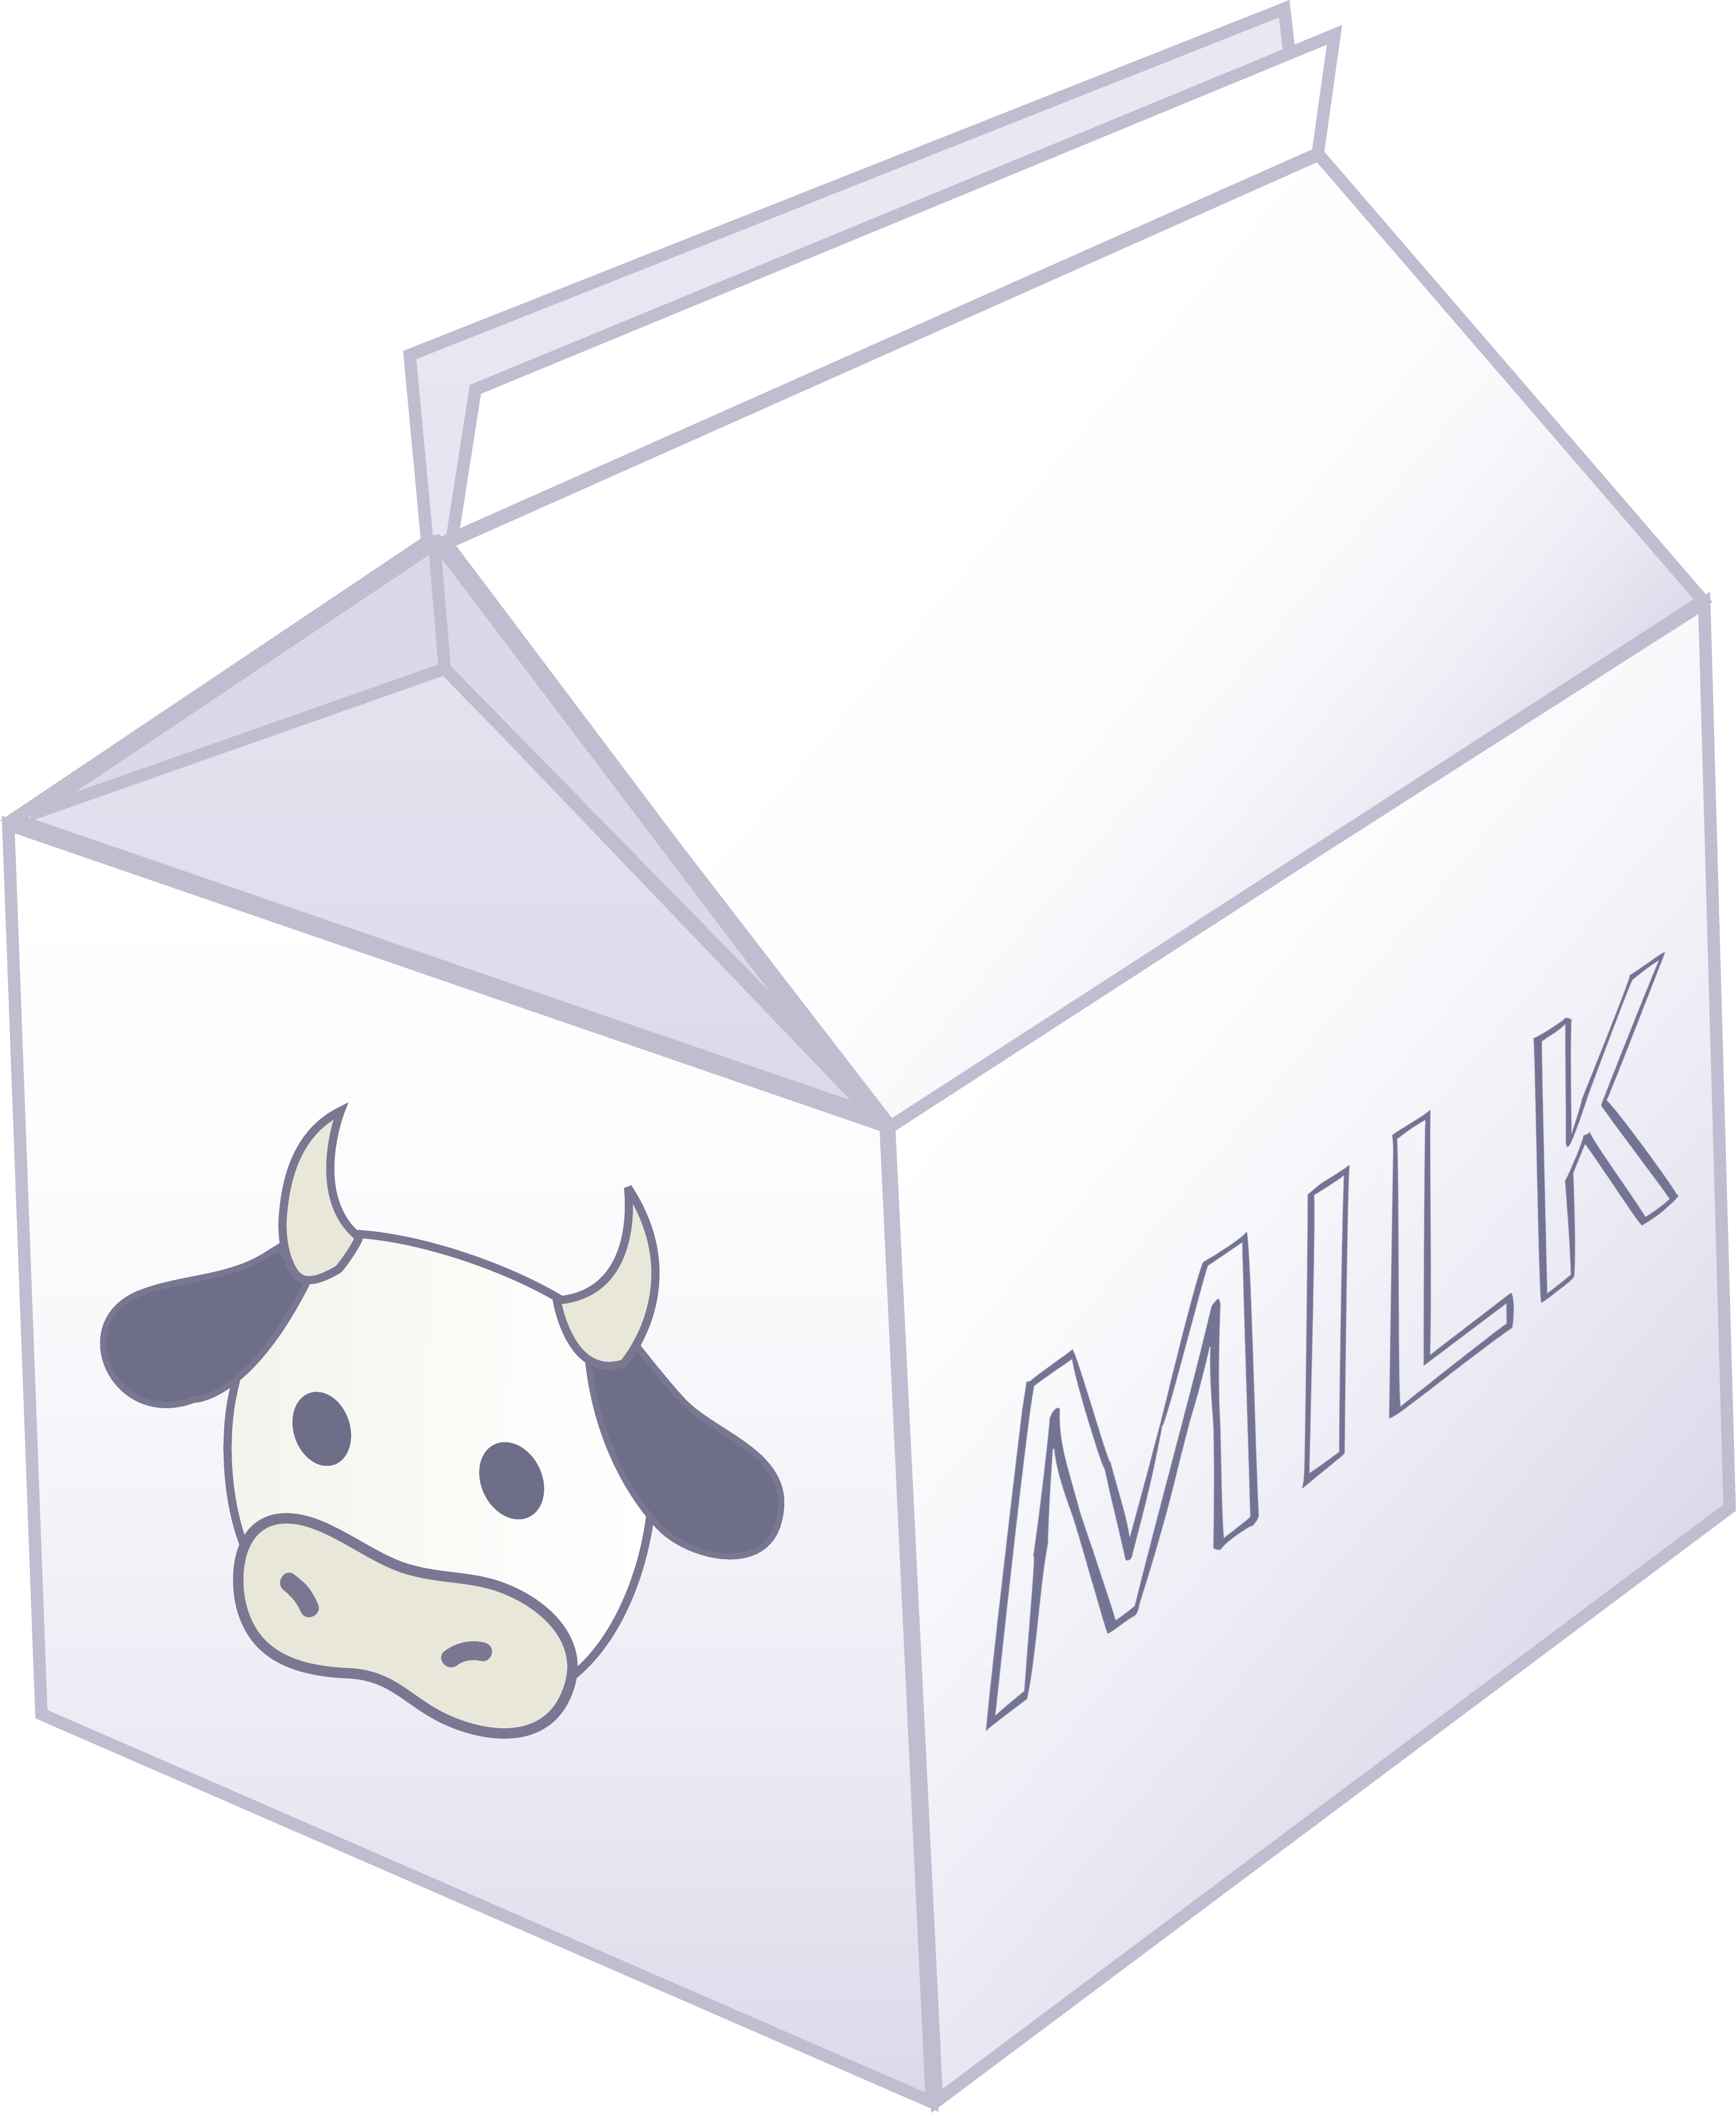 Images For > 1 Pint Of Milk Carton